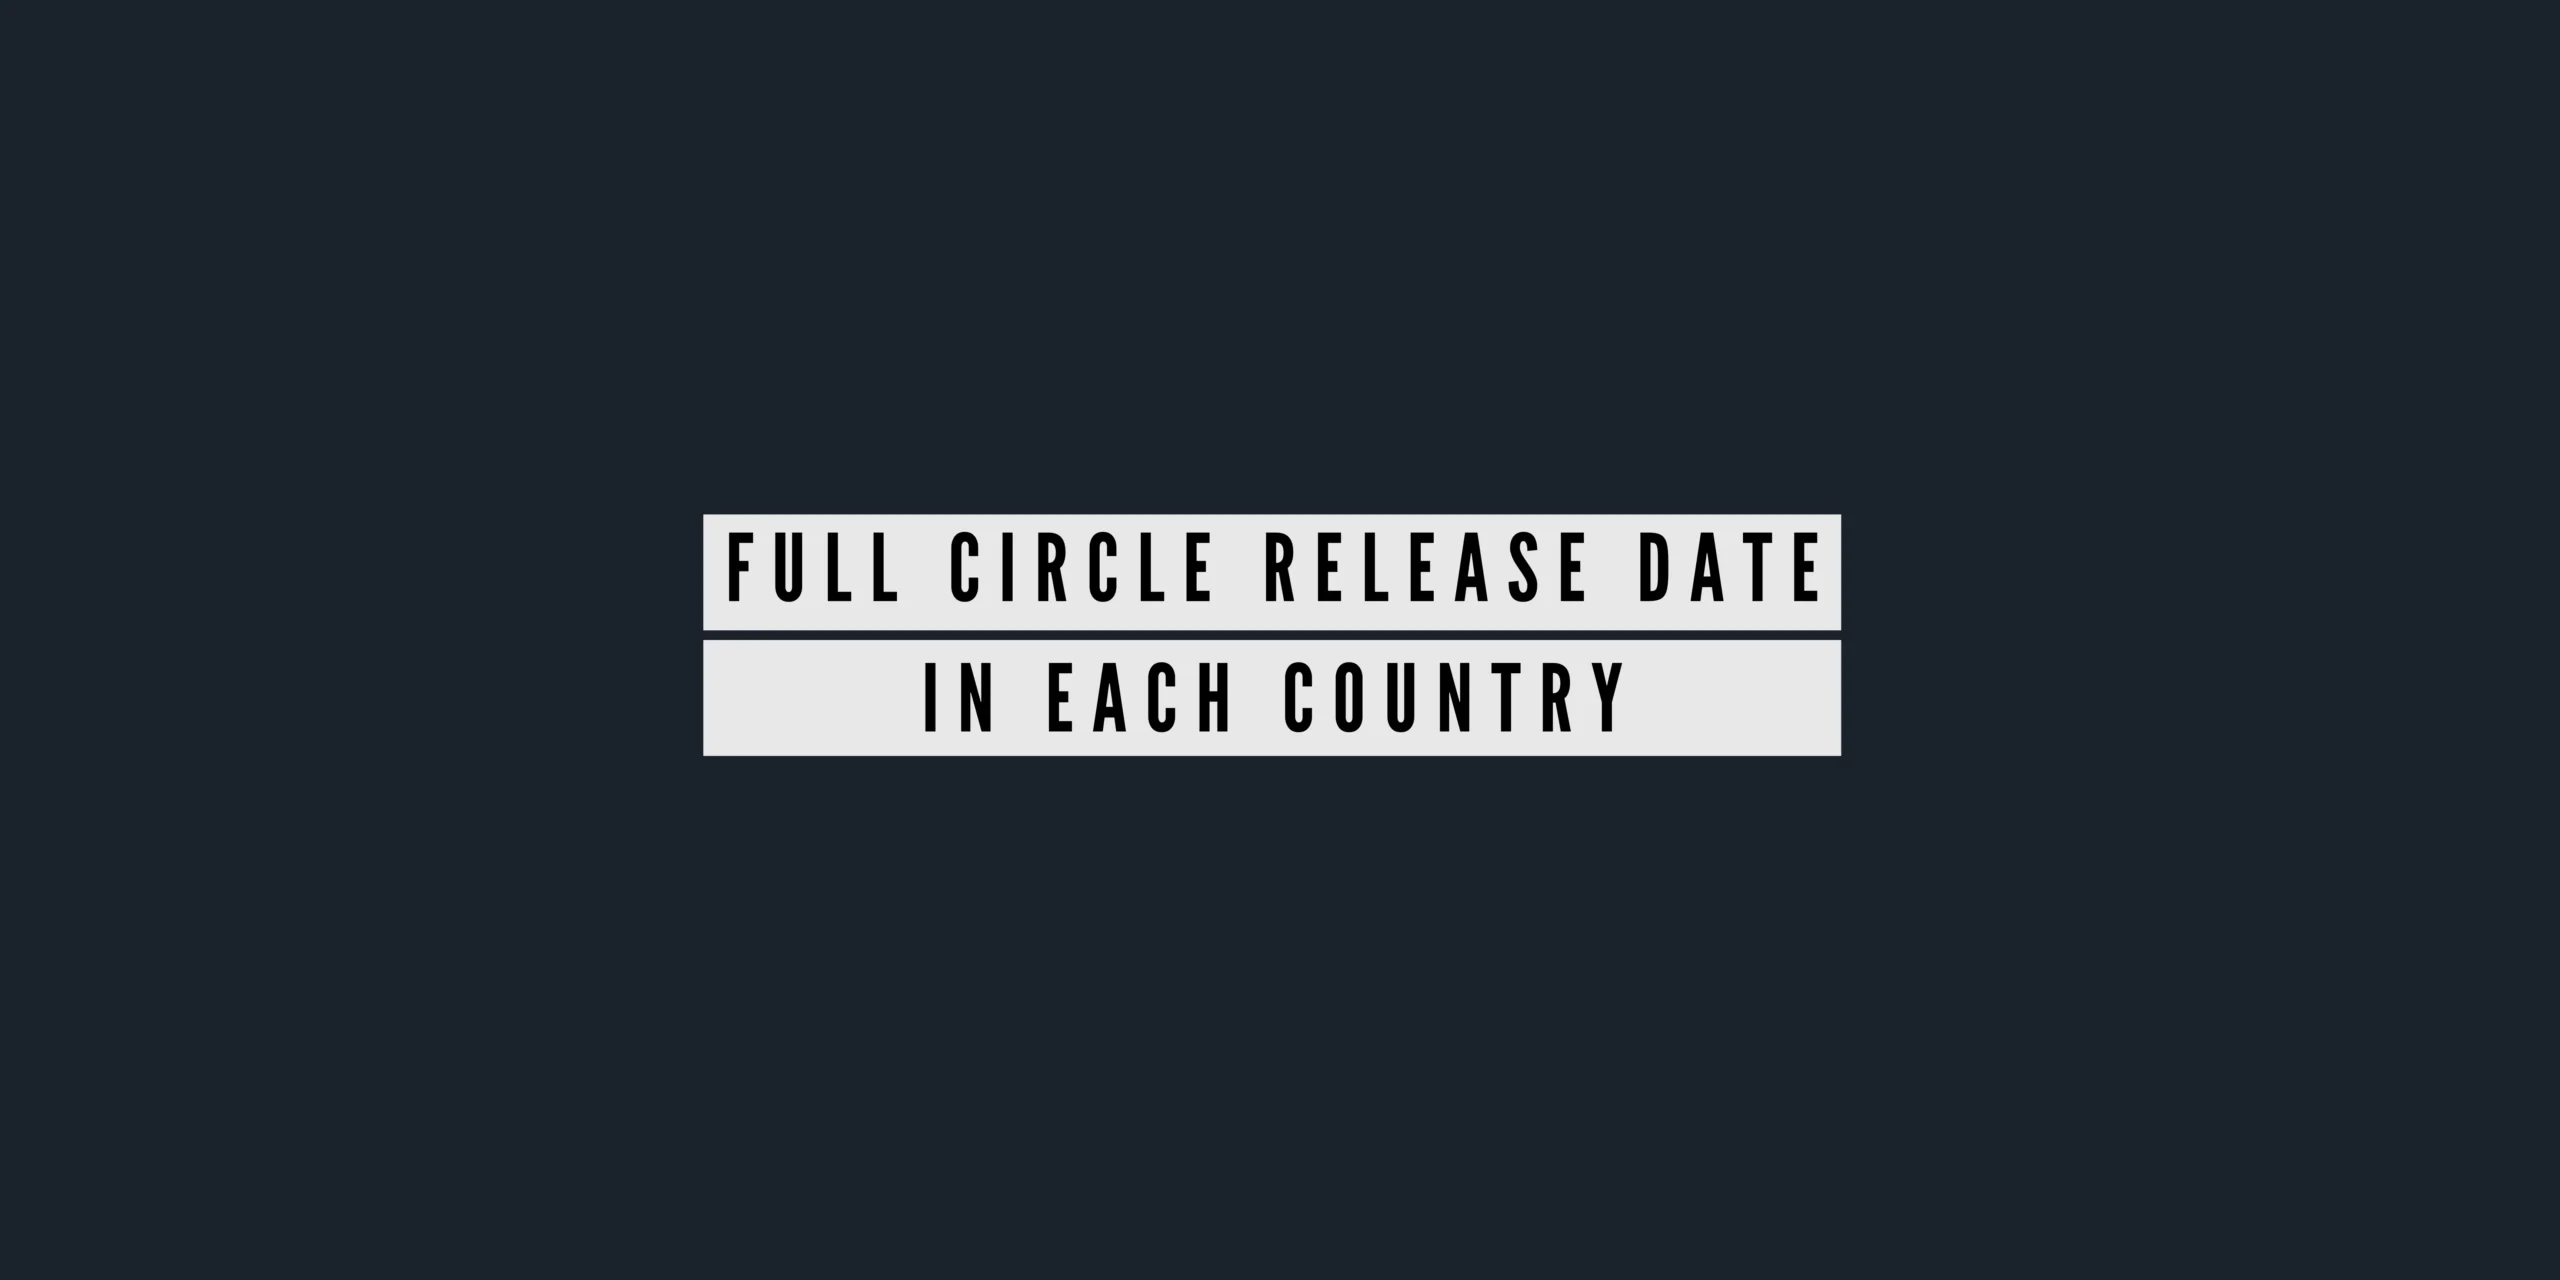 Full Circle Release Date In Each Country